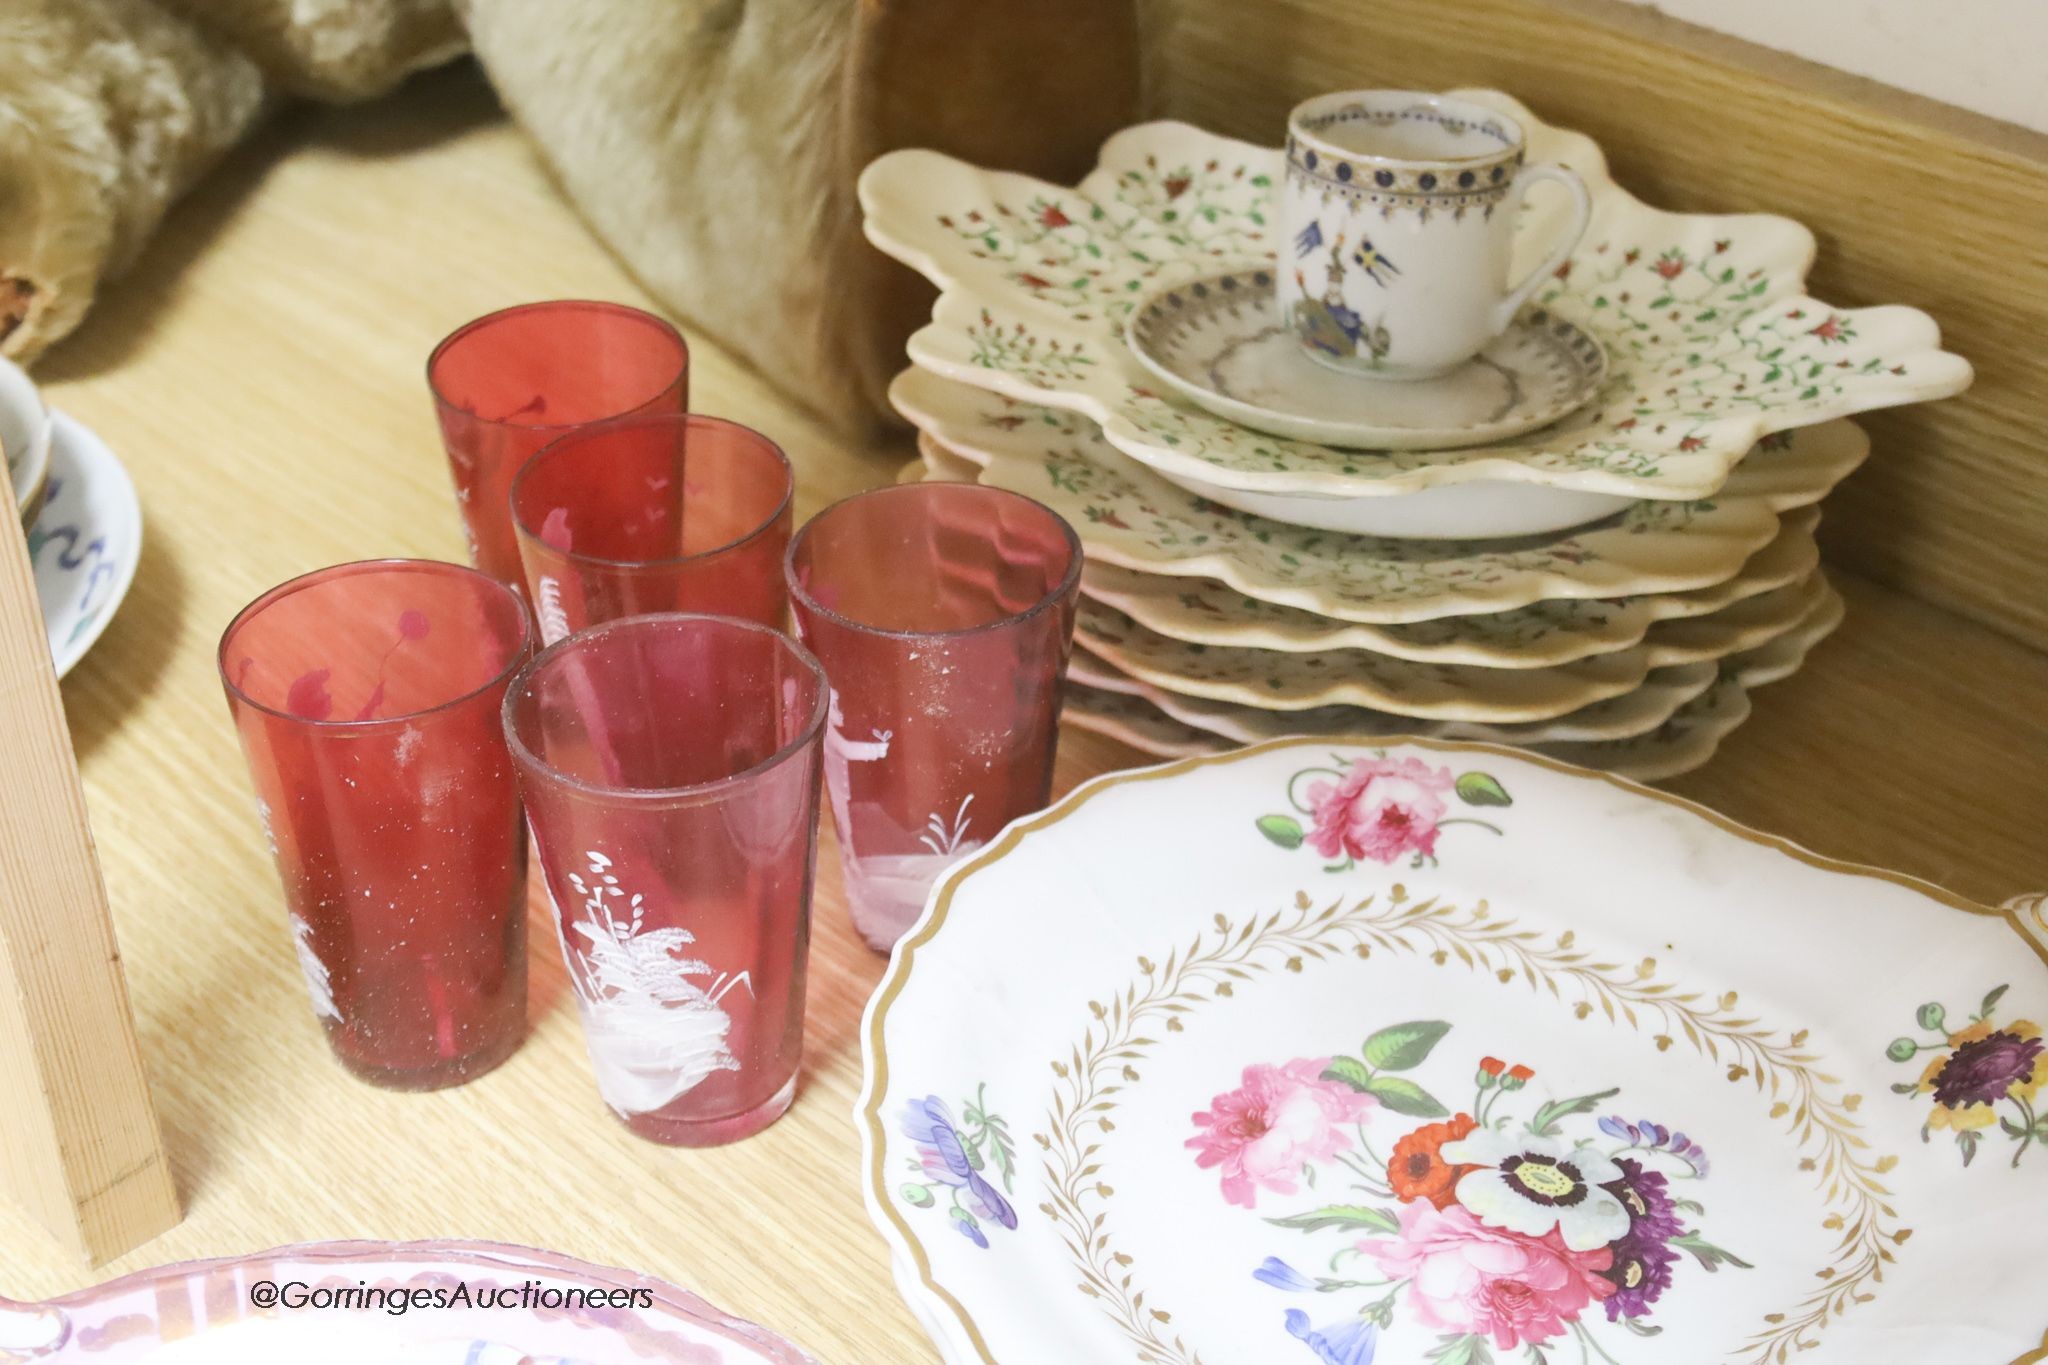 A Delft polychrome plate, two Coalport dishes, a dessert set, two lustre dishes and five cranberry glasses